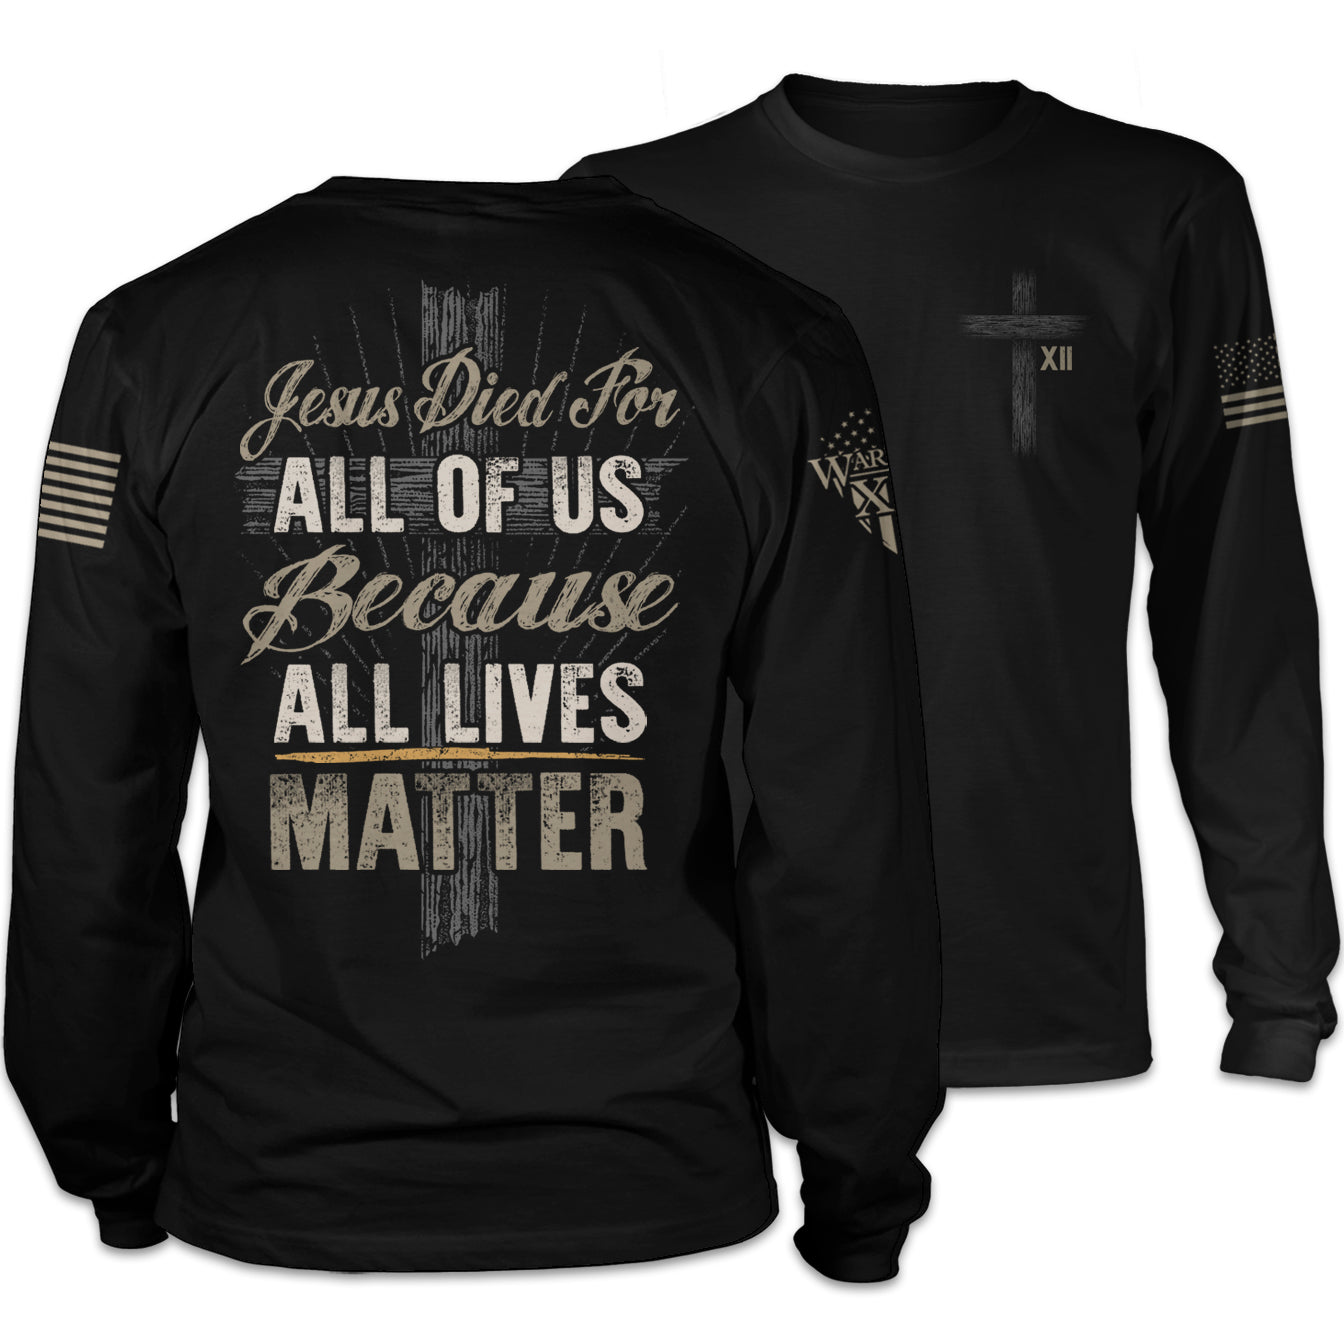 Front & back black Long sleeve shirt with the "Jesus died for all of us because ALL LIVES matter" printed on the shirt.